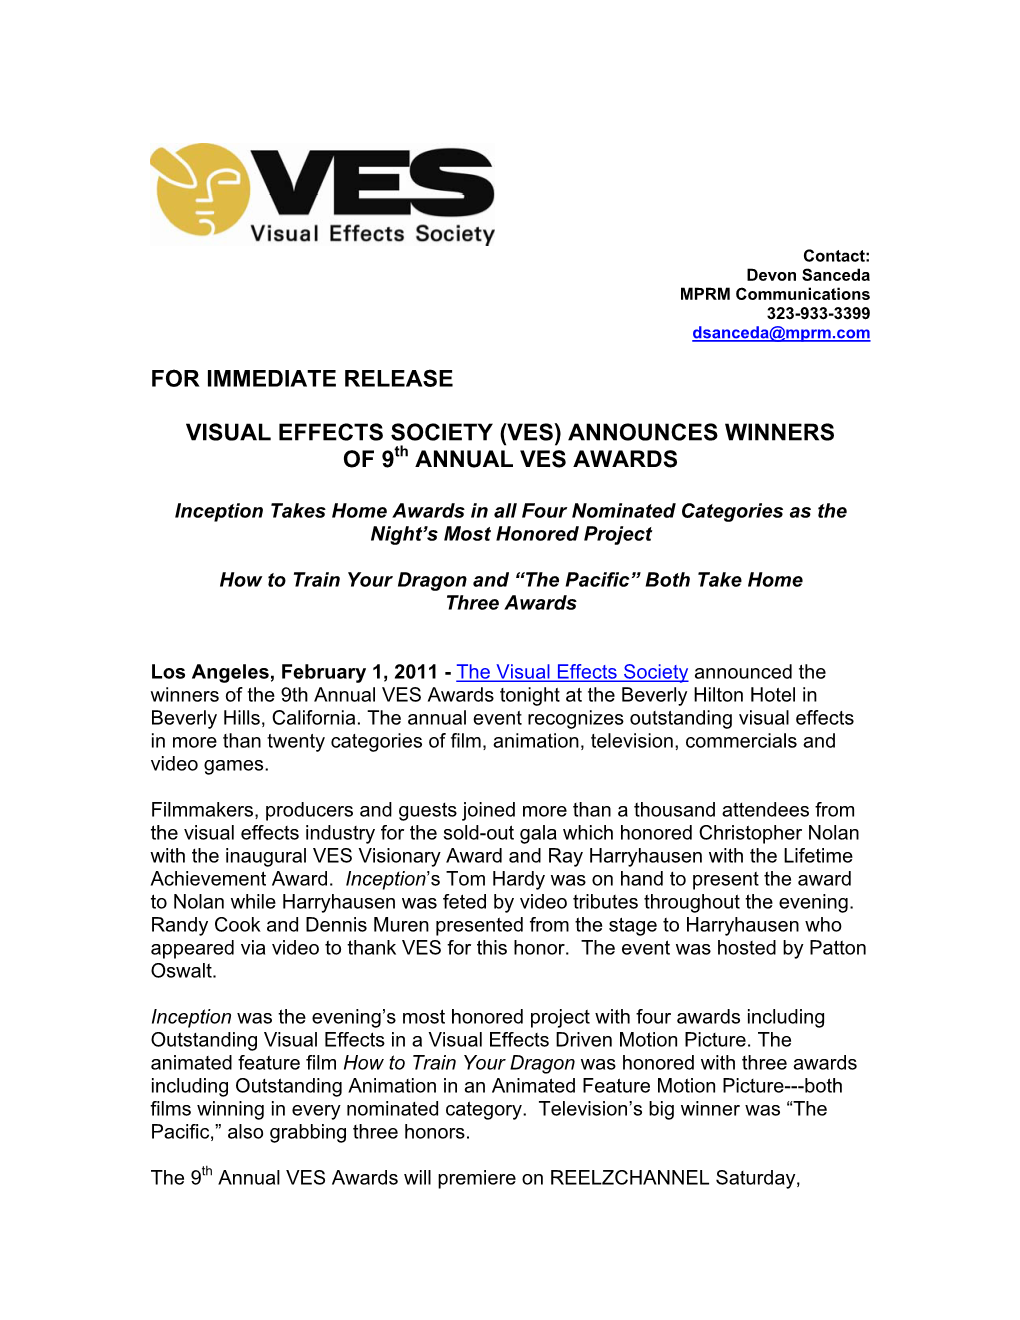 Announces Winners of 9 Annual Ves Awards